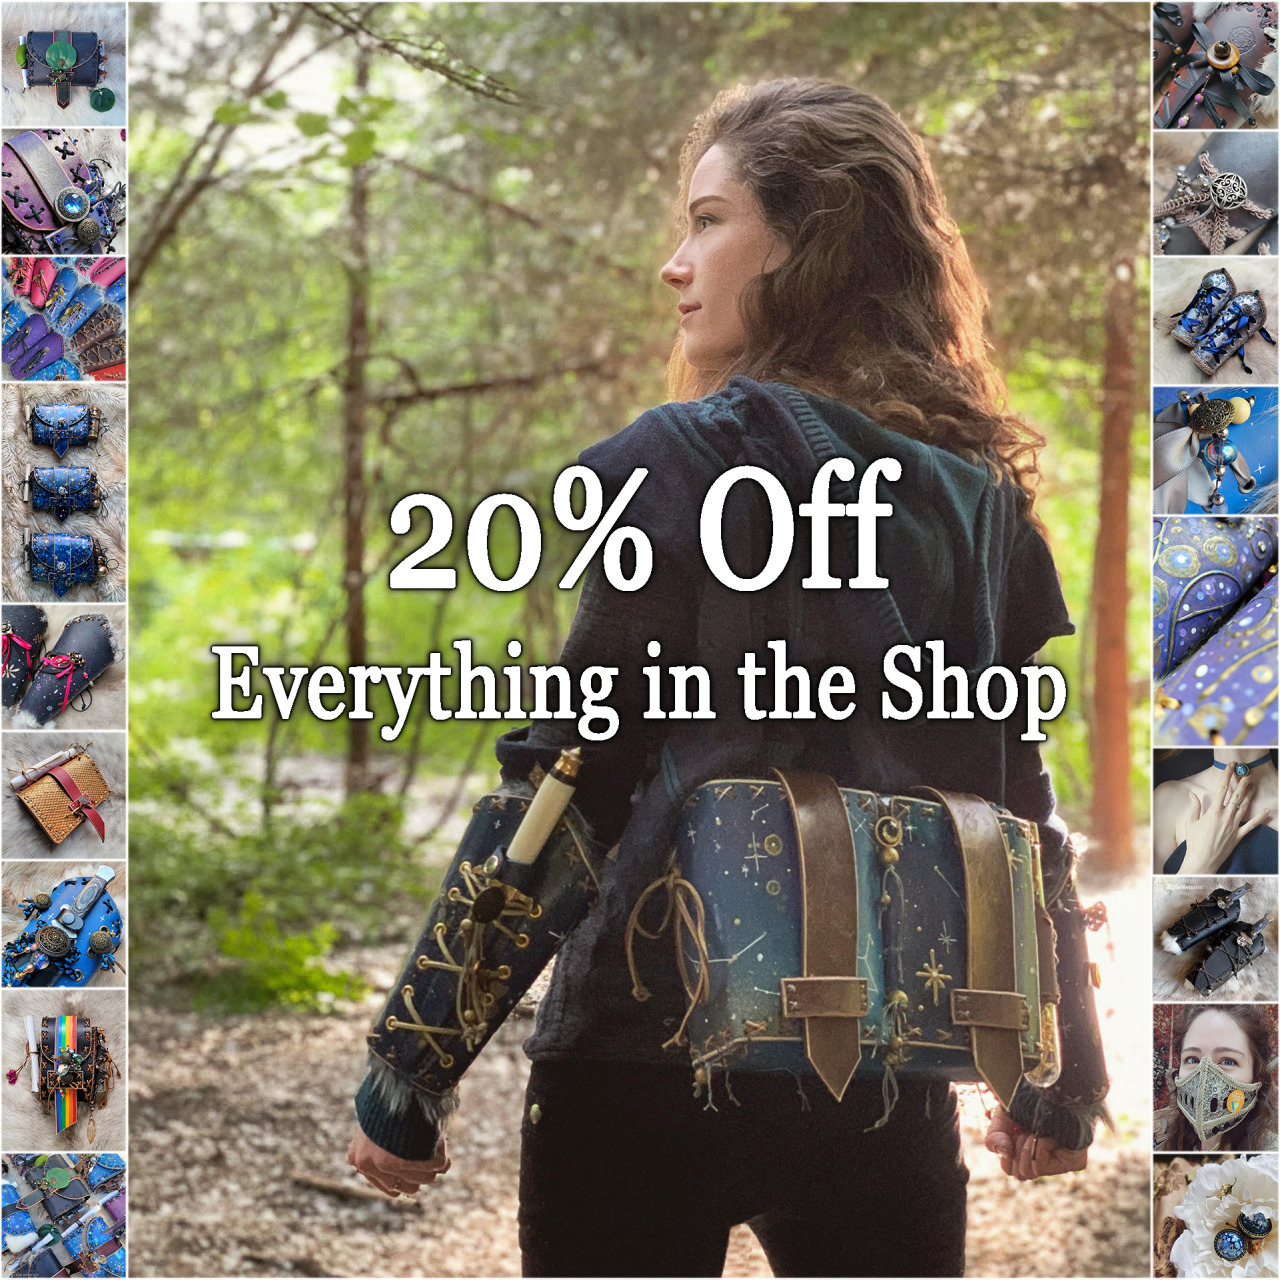 A Happy Faire Friday to you all! This weekend, as a way to say thank you for all of your support, as well as in an effort to make room for new products, Im running a 20% sale on all listings in the Loreamour and Archer Inventive shops. 😊This sale runs until Monday at Midnight so snag your Adventure Gear just in time for Faire🏰Thank you all for your wonderful comments, and insight. You inspire me every day to push the boundaries of my creativity and I couldnt be more grateful. Have a wonderful rest of your Friday, and a magical long weekend. ❤️https://www.etsy.com/shop/ArcherInventive https://www.etsy.com/shop/Loreamour #spring sale#sale #get your swag  #dress like a dame #leather goods#fantasy apparel#handmade#bracers#pouches#pins#prints#archerinventive#loreamour#save #treat your self